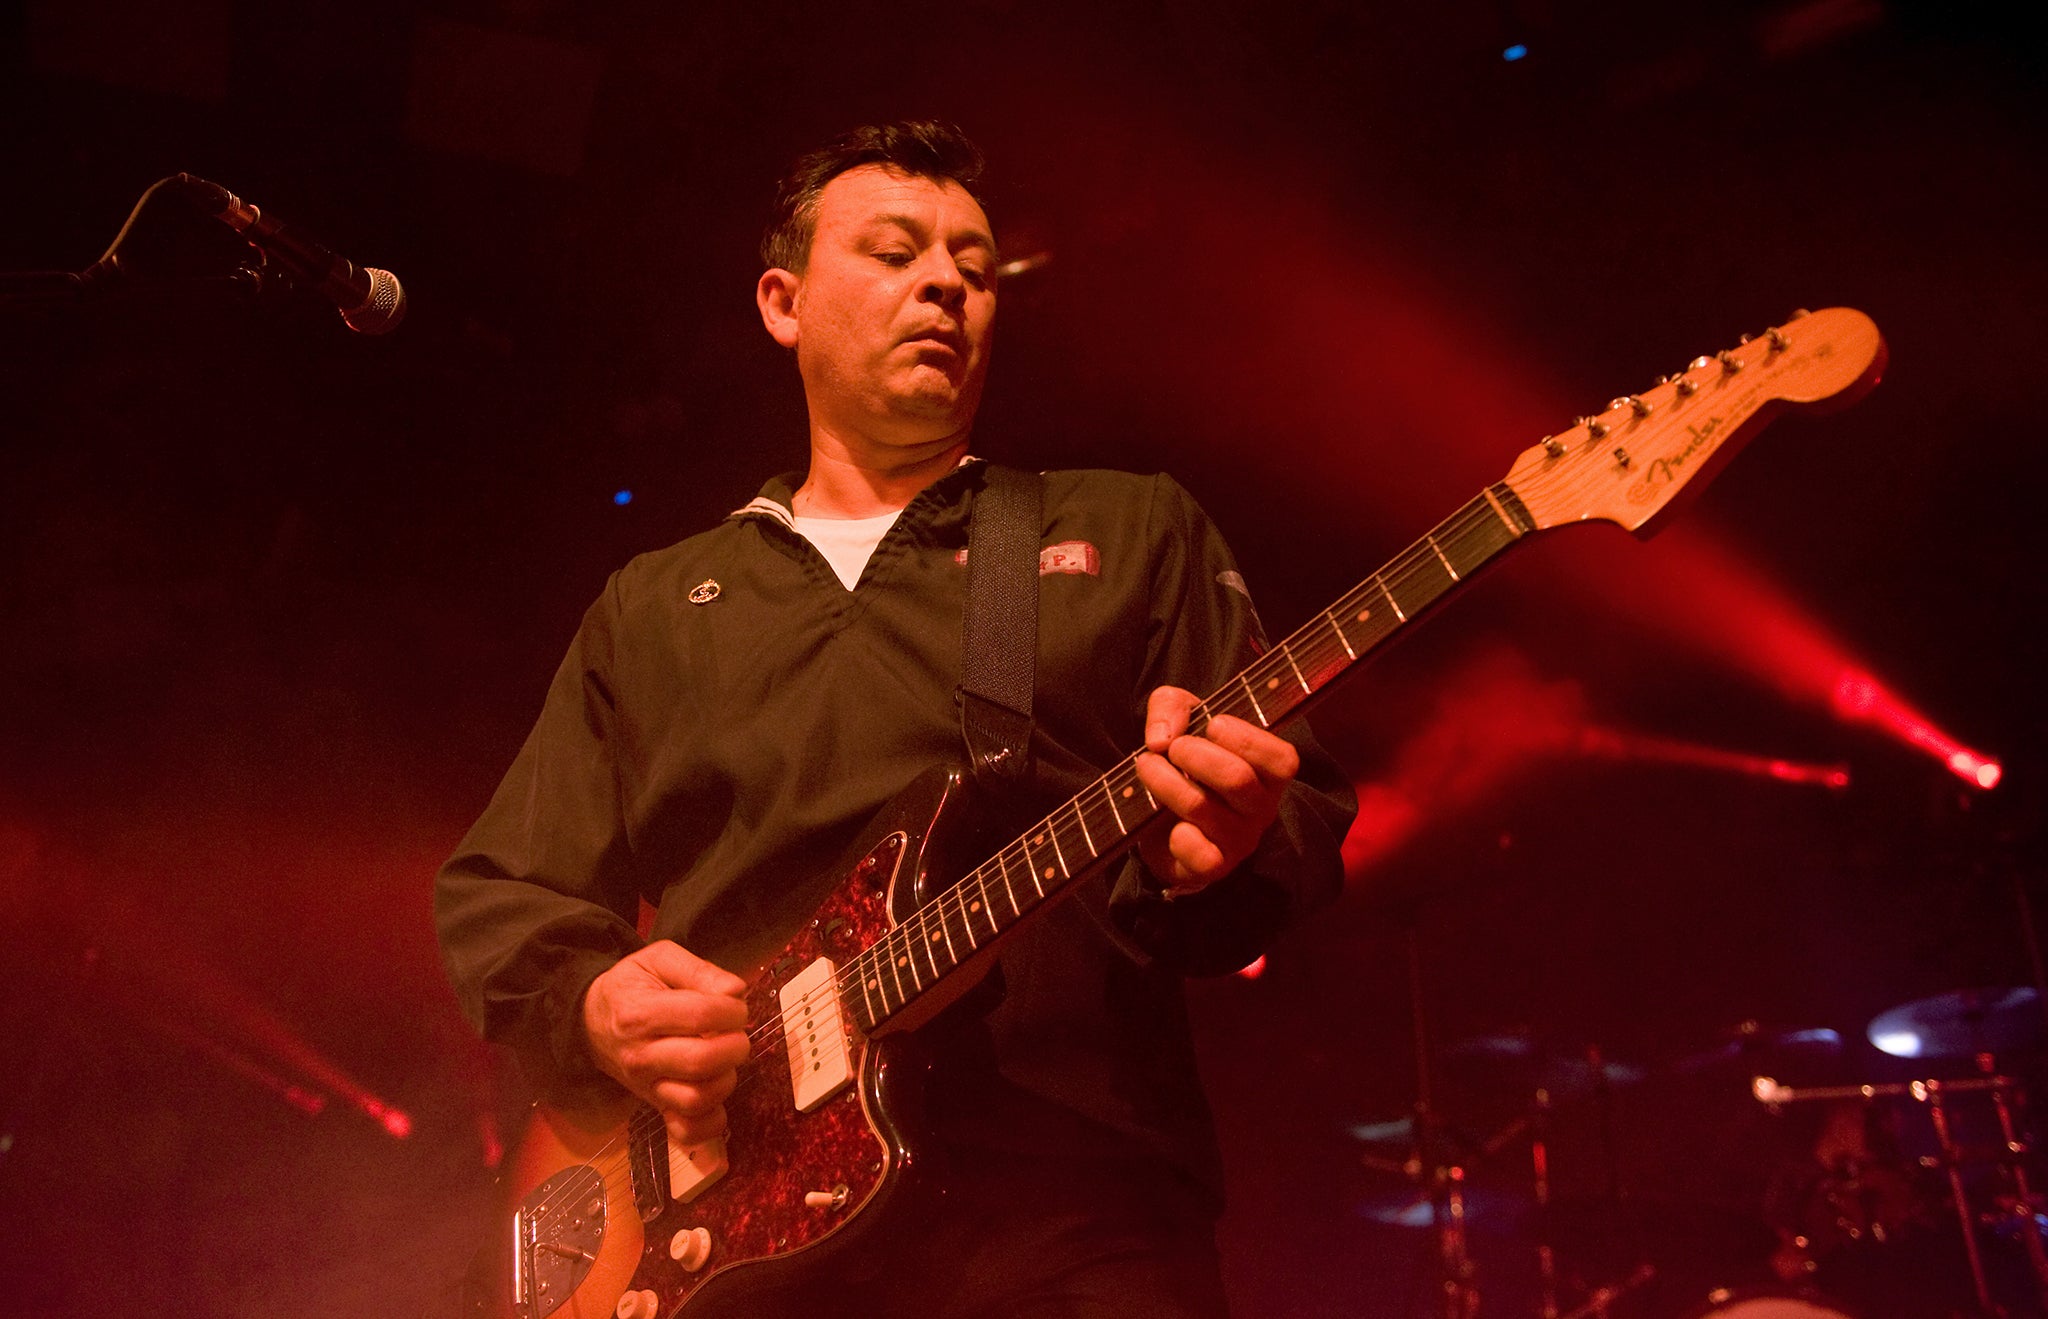 James Dean Bradfield of the Manic Street Preachers performs on stage at Barrowlands Ballroom